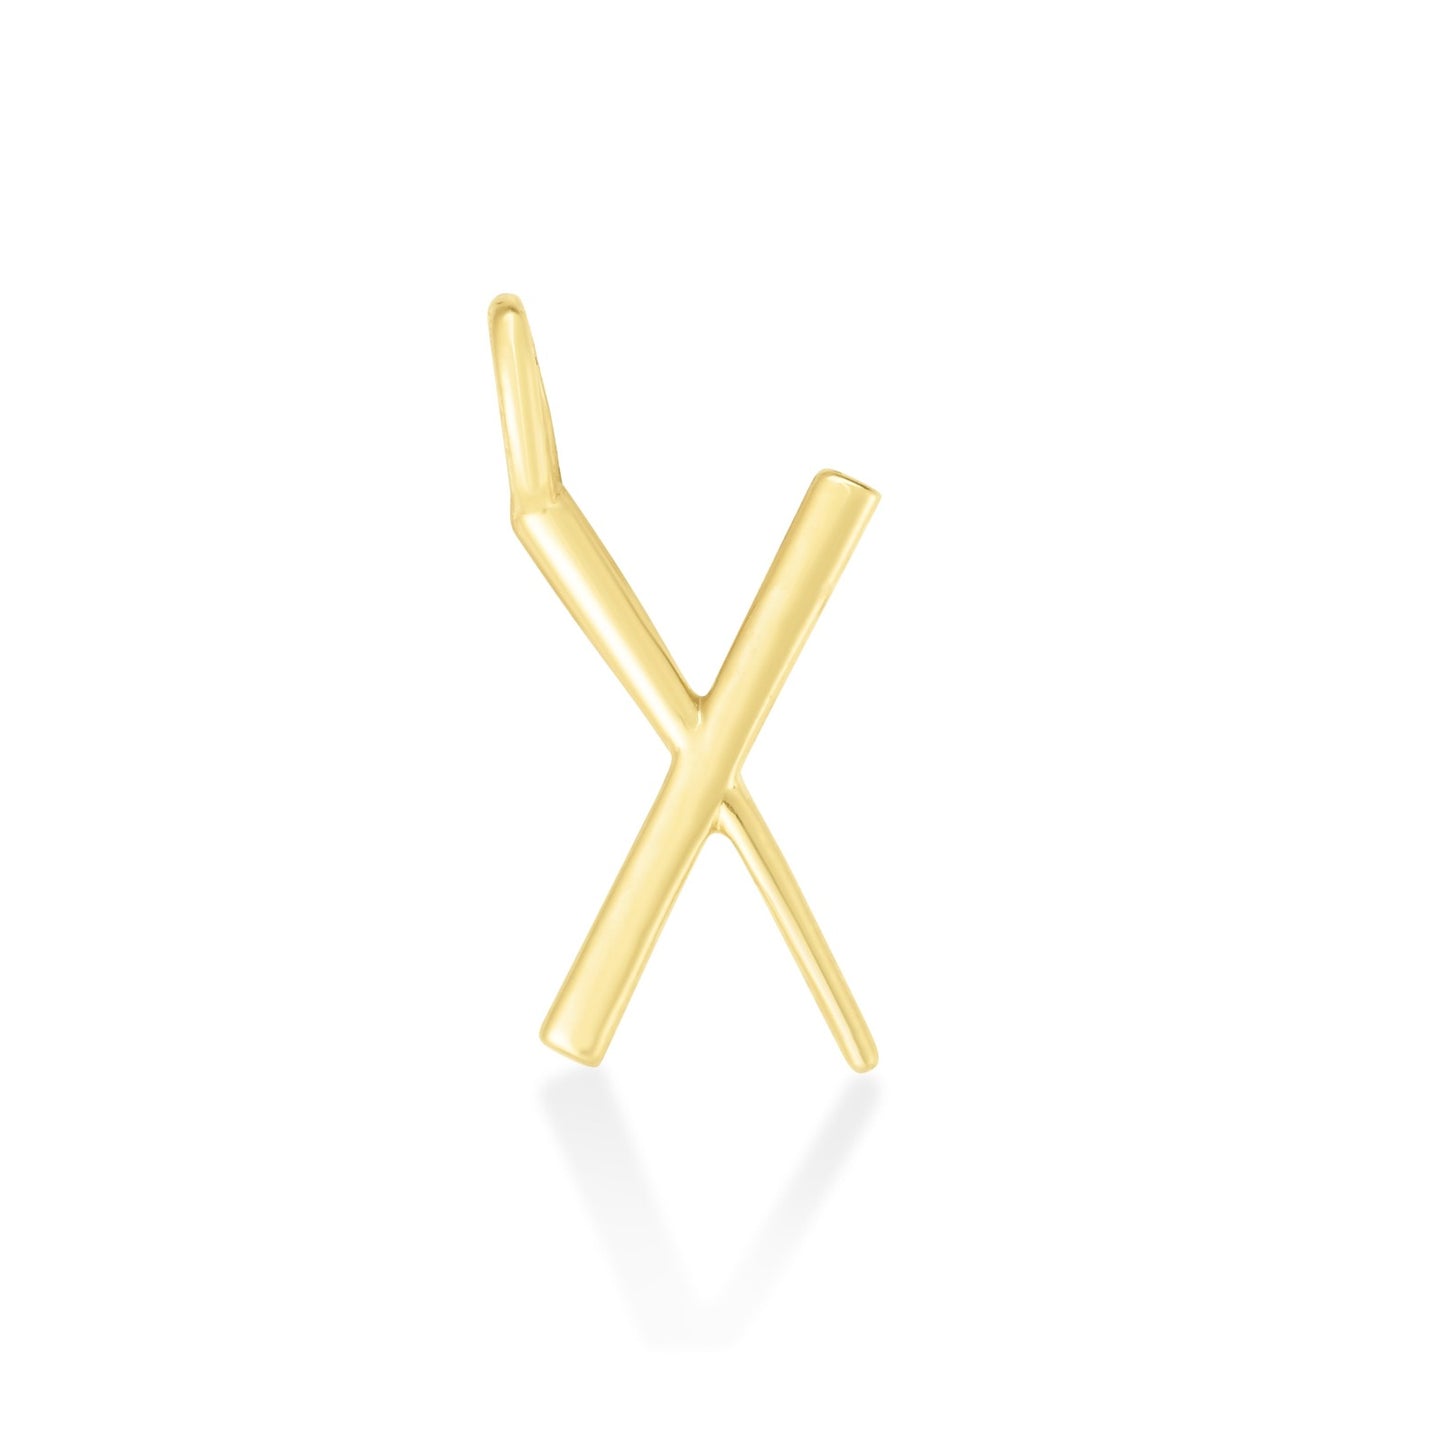 14K yellow gold X letter charm. 